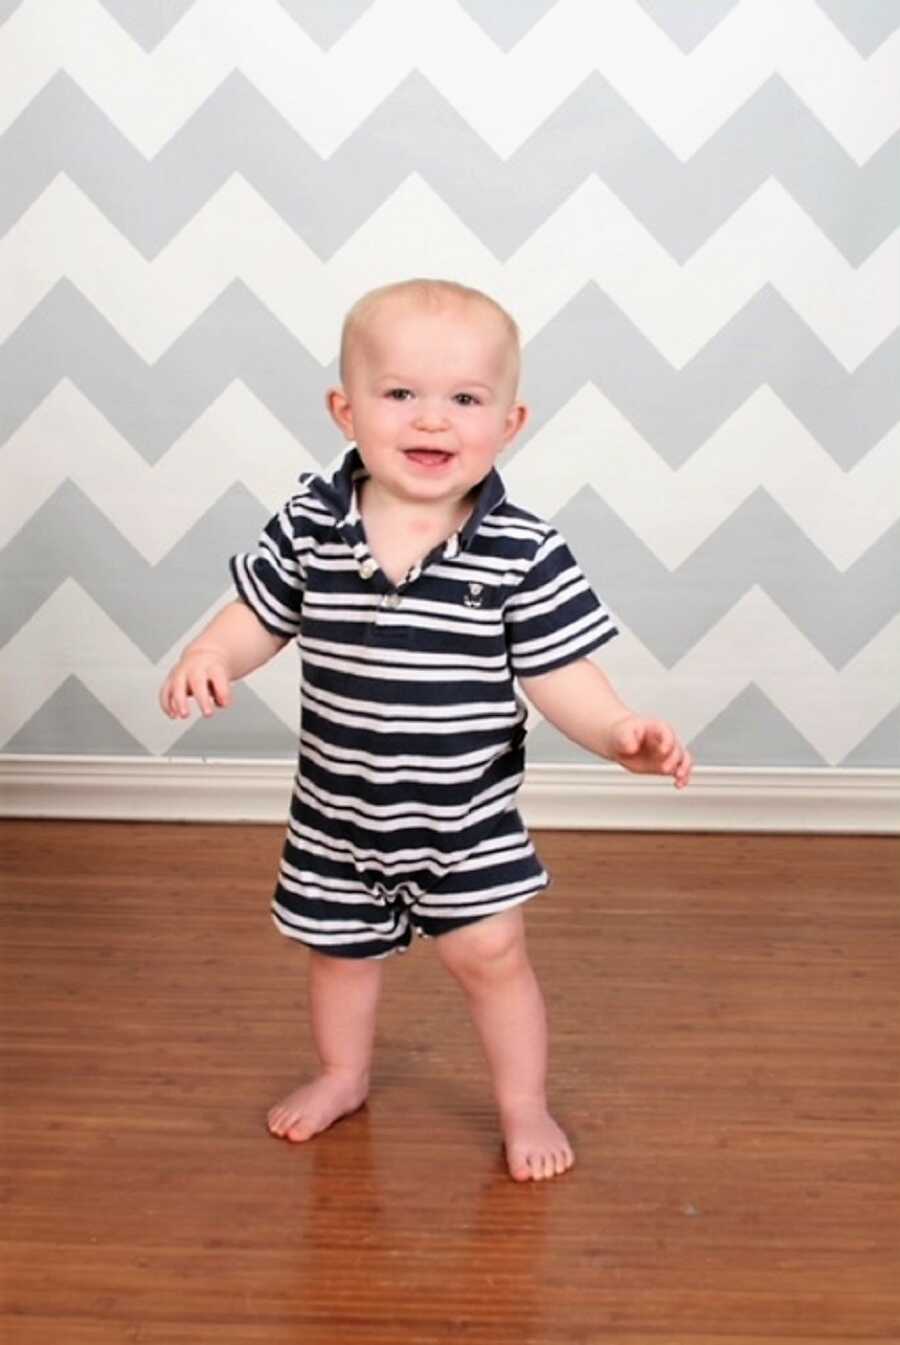 toddler with autism standing on wood floors wearing a black and white tripped shirt